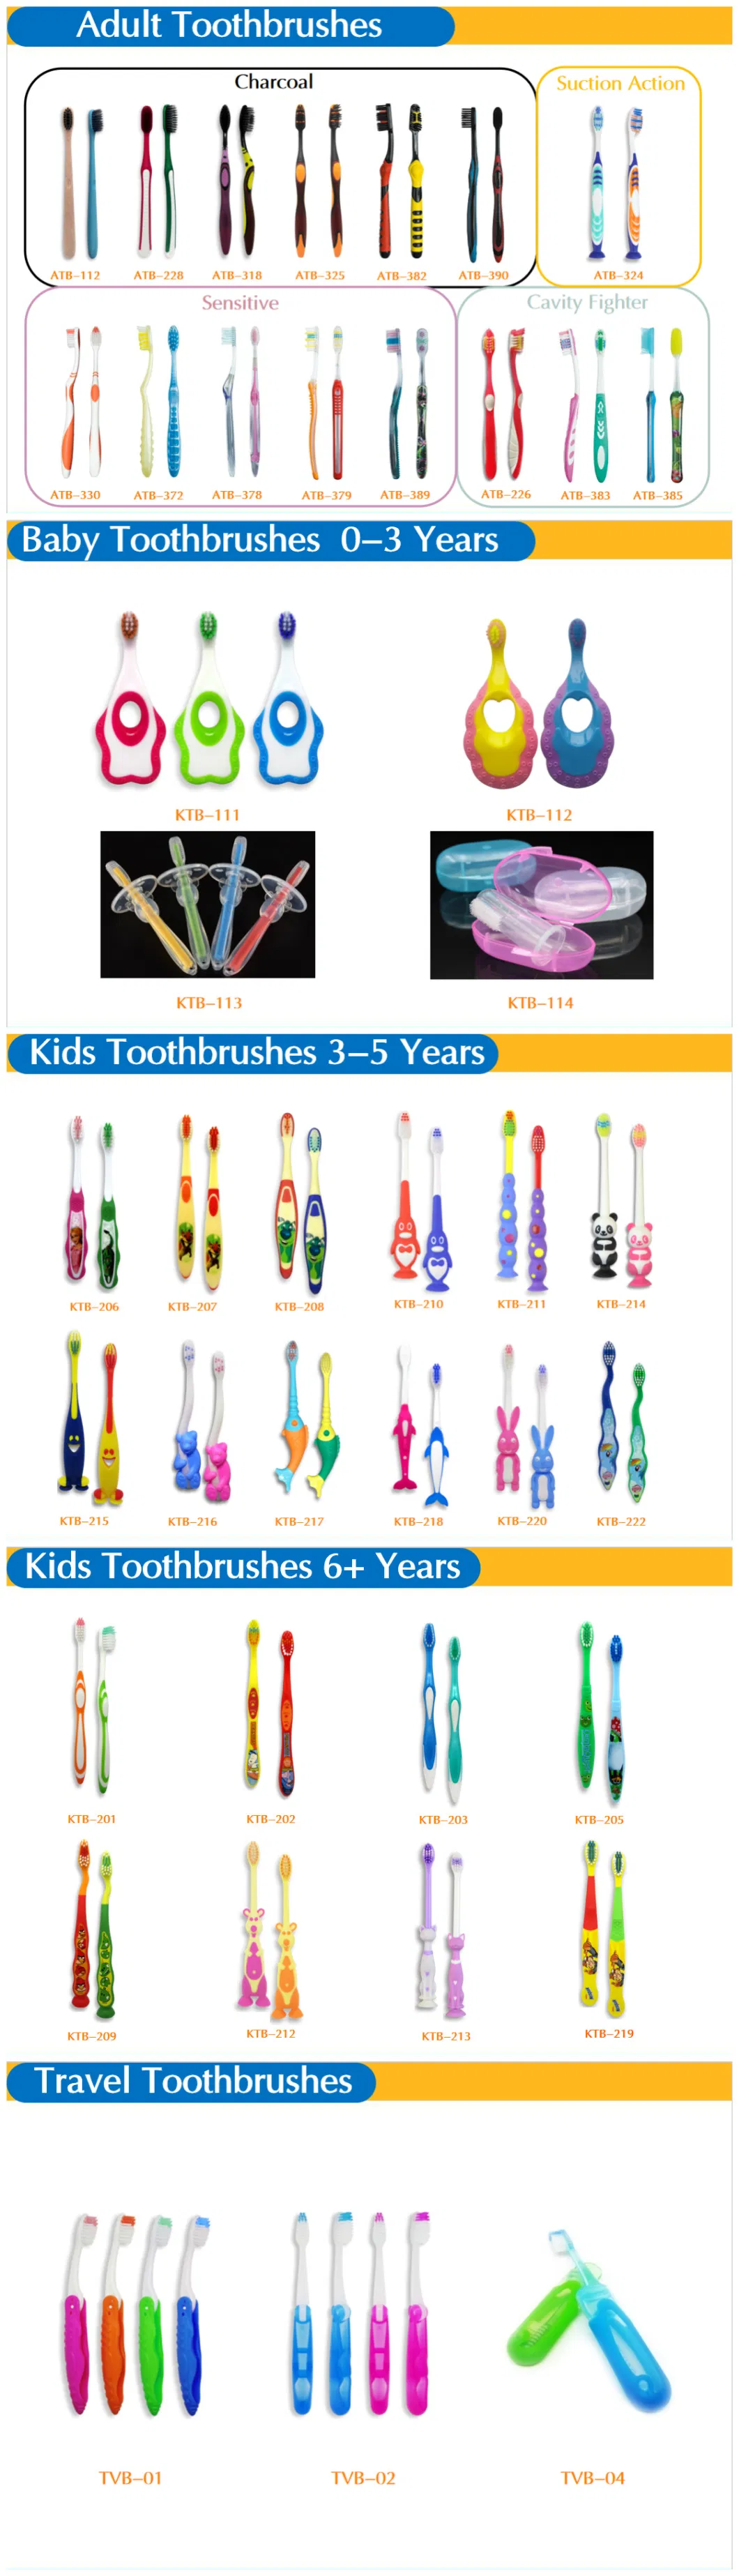 100% Eco-Friendly Colorful Metal Adult Toothbrush with Replaceable Head